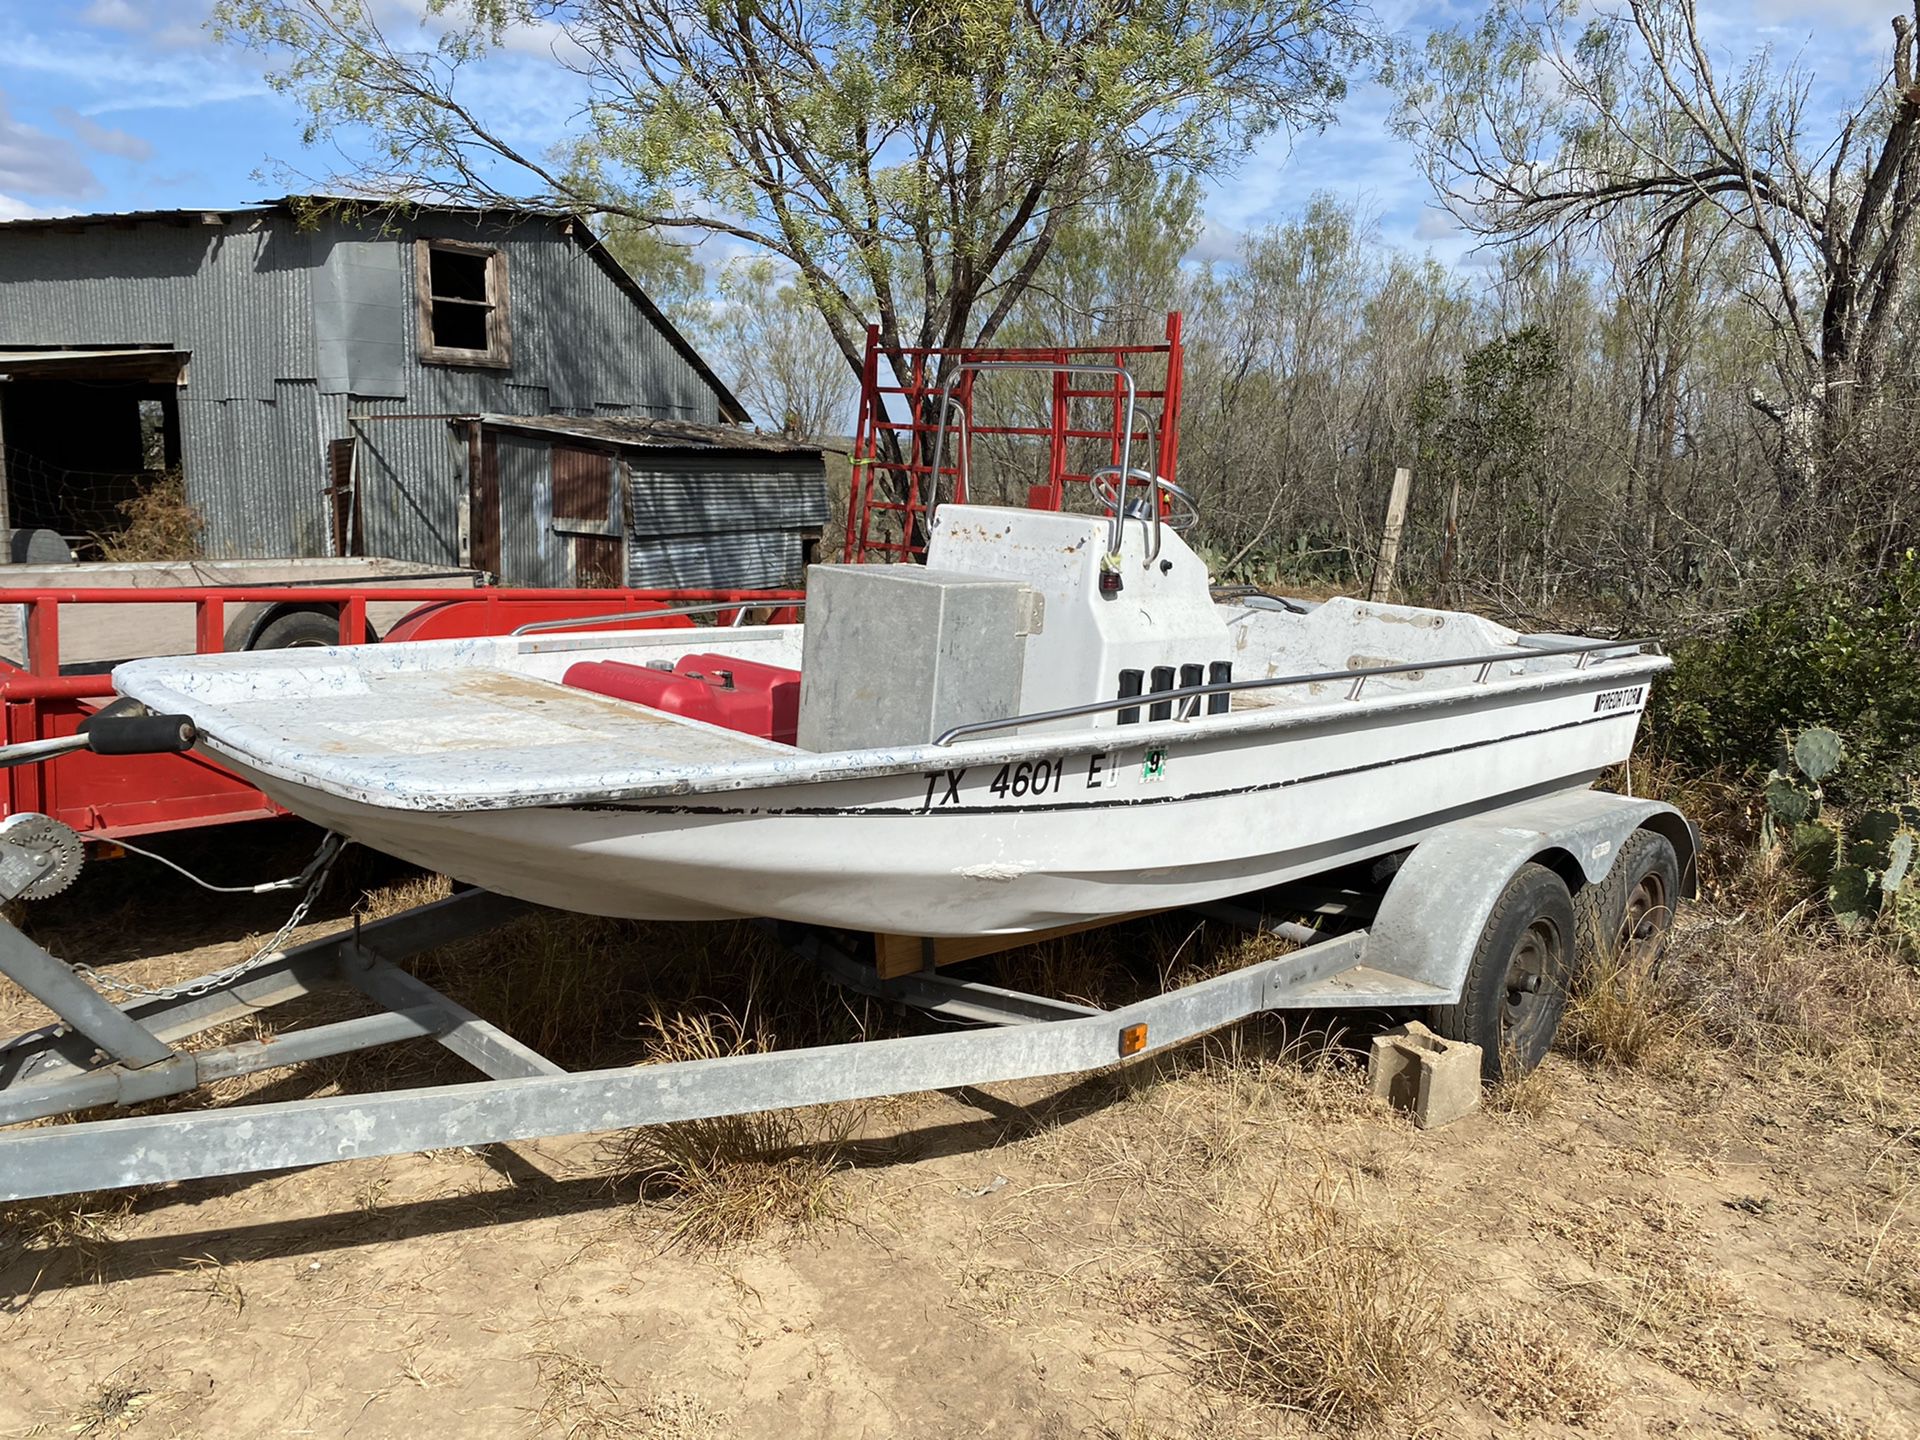 Super channel flats boat with trailer